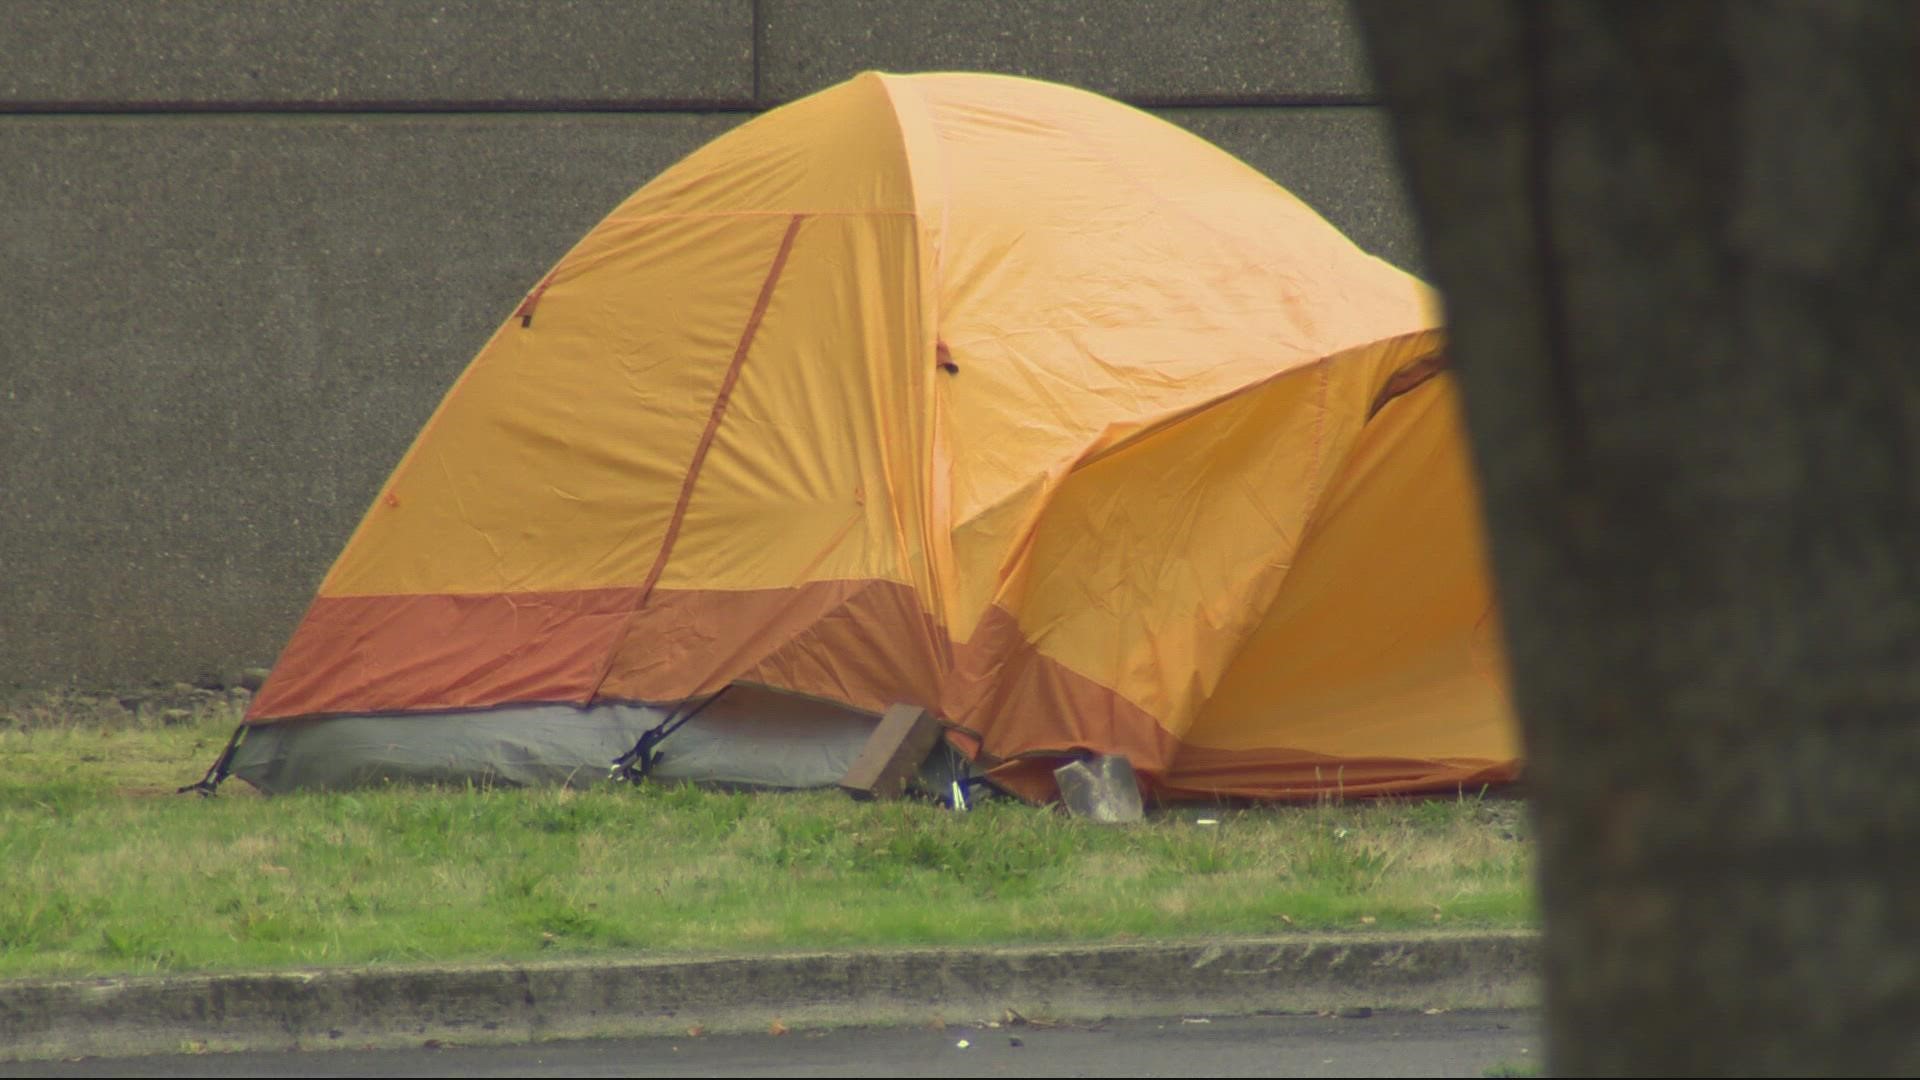 City leaders will set up camps to help Vancouver's estimated 500-600 homeless residents.